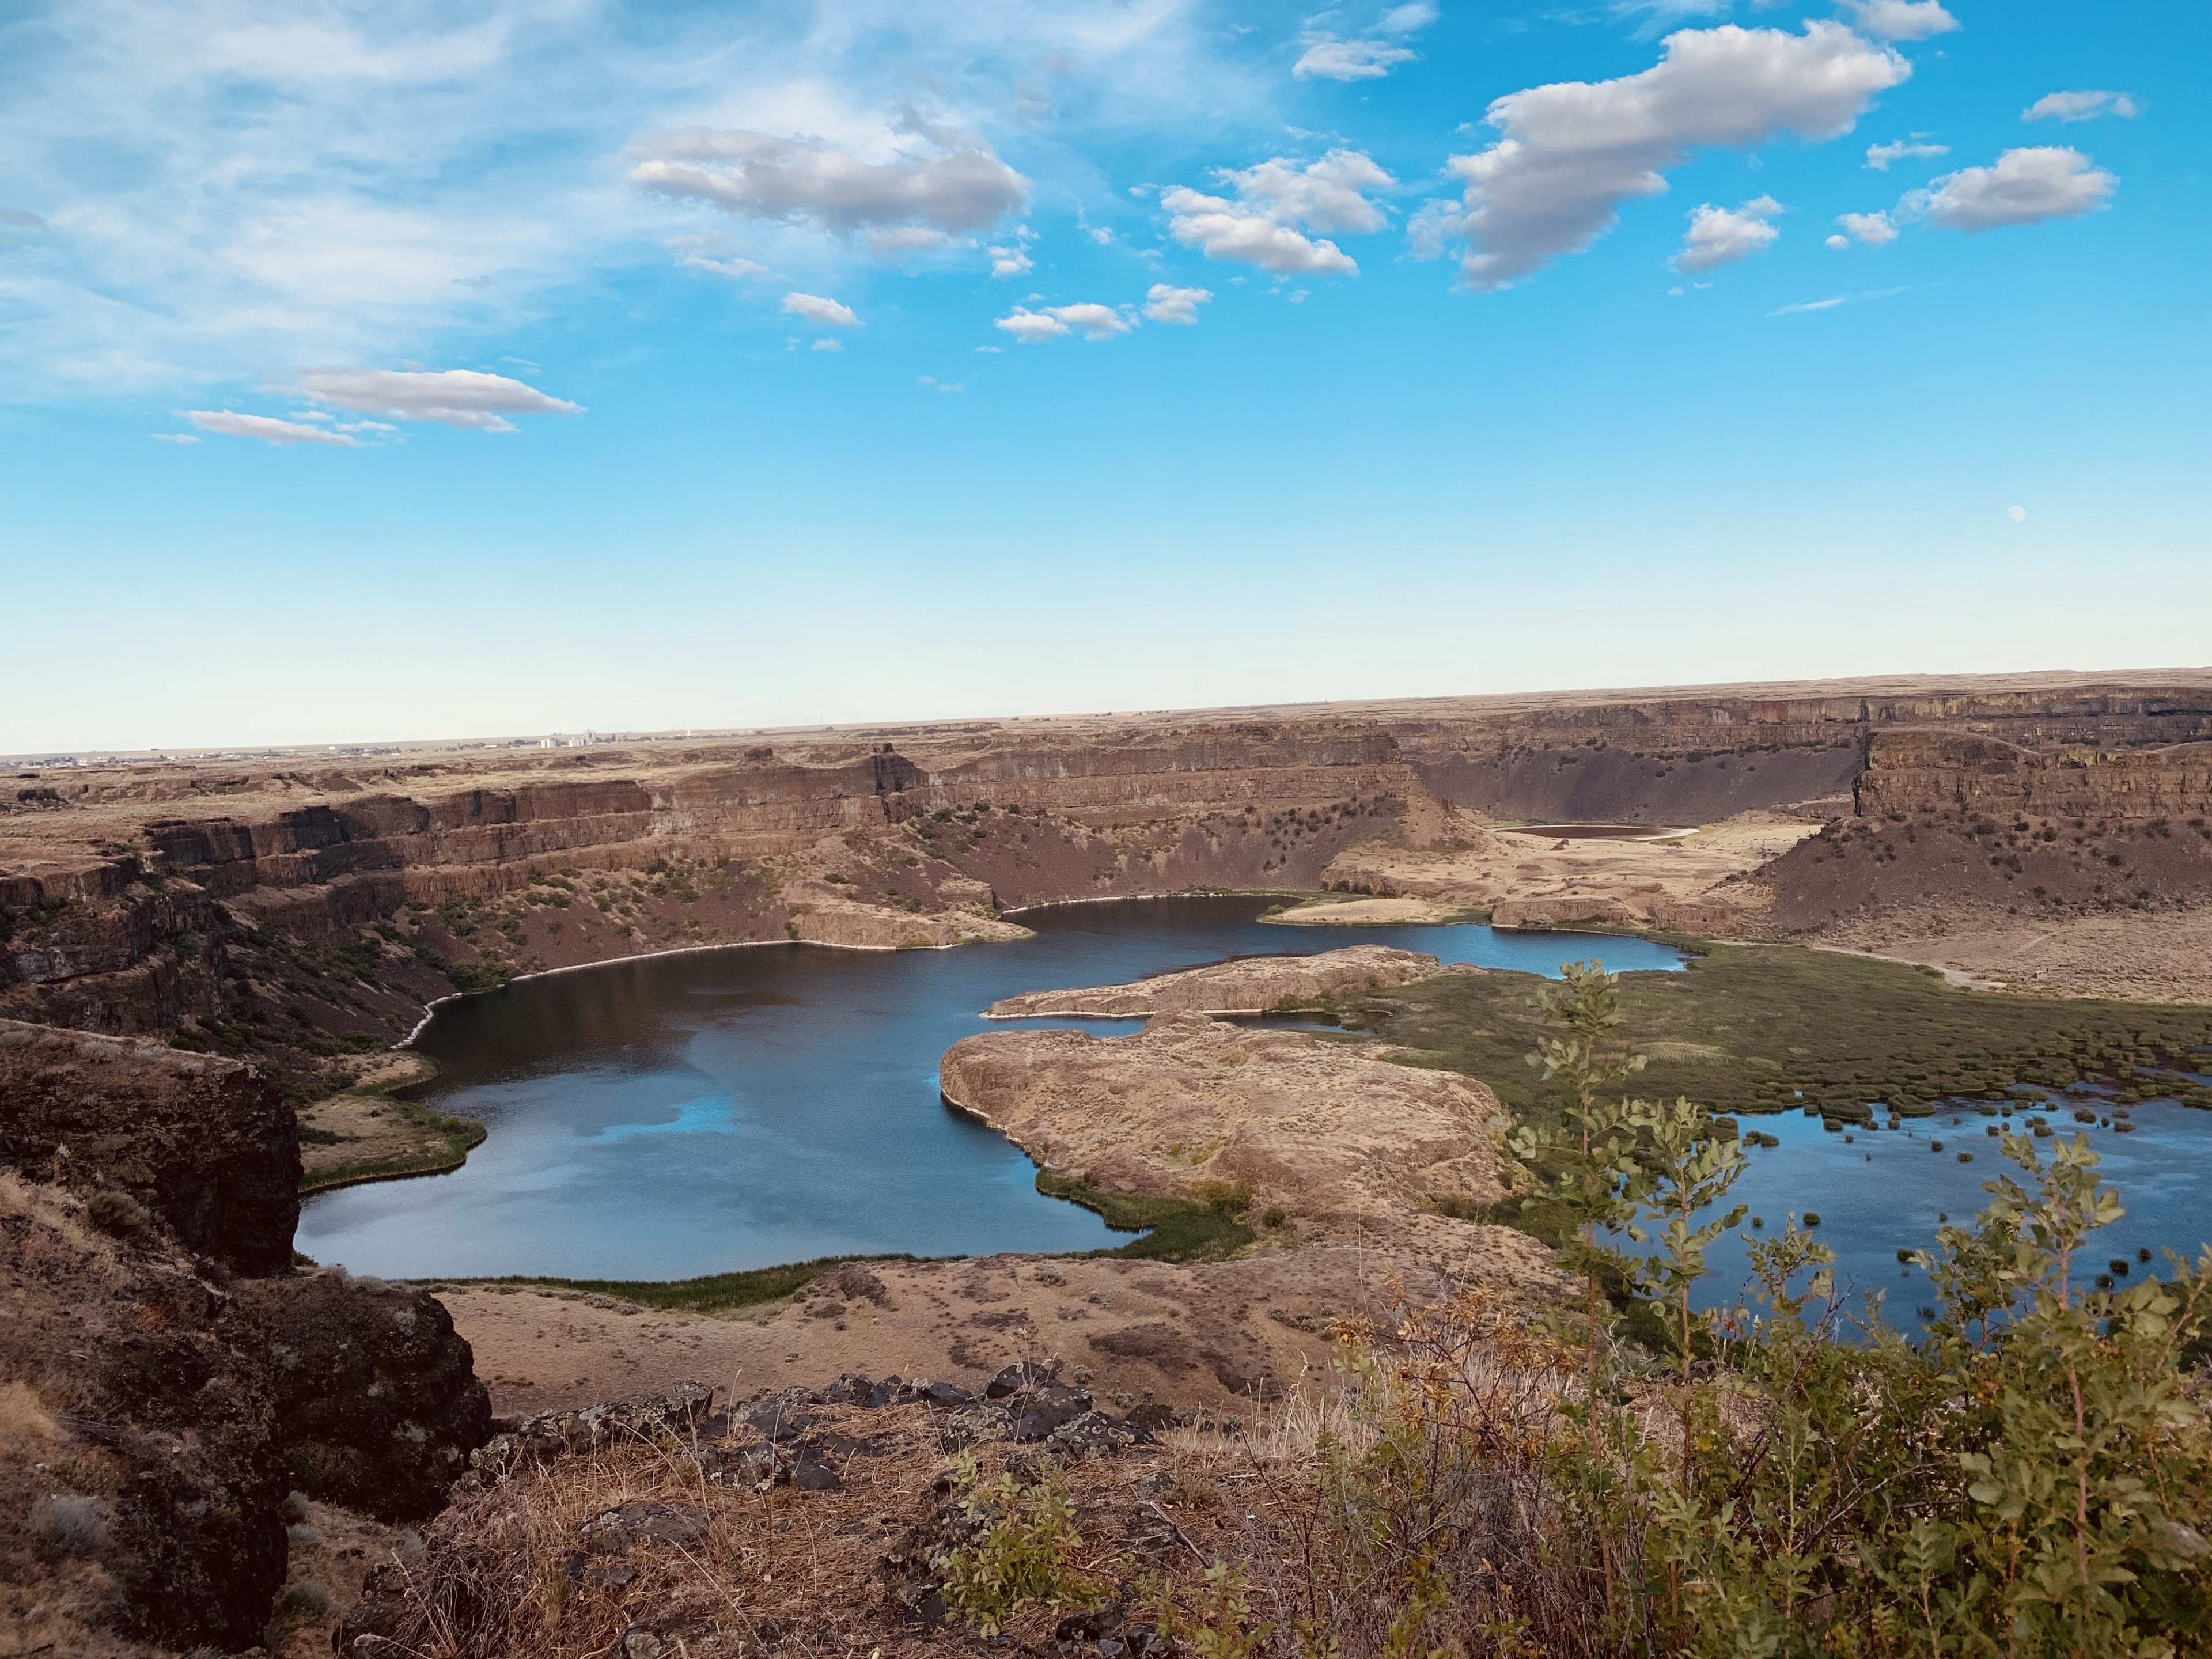 Dry Falls, thought to be the greatest known waterfall that ever existed.